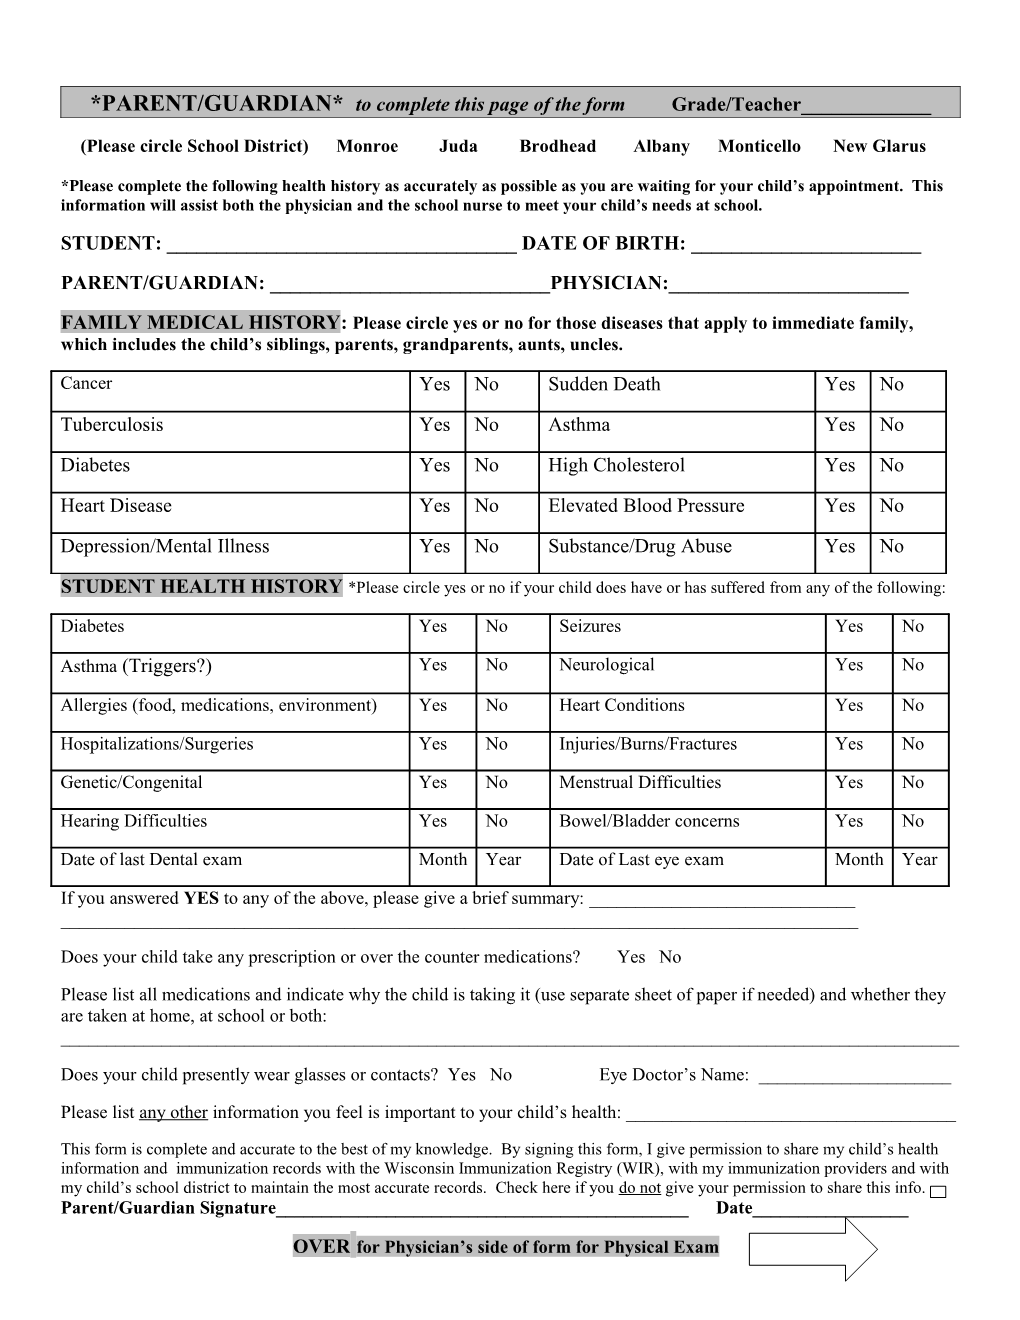 PARENT to Complete This Page of the Form